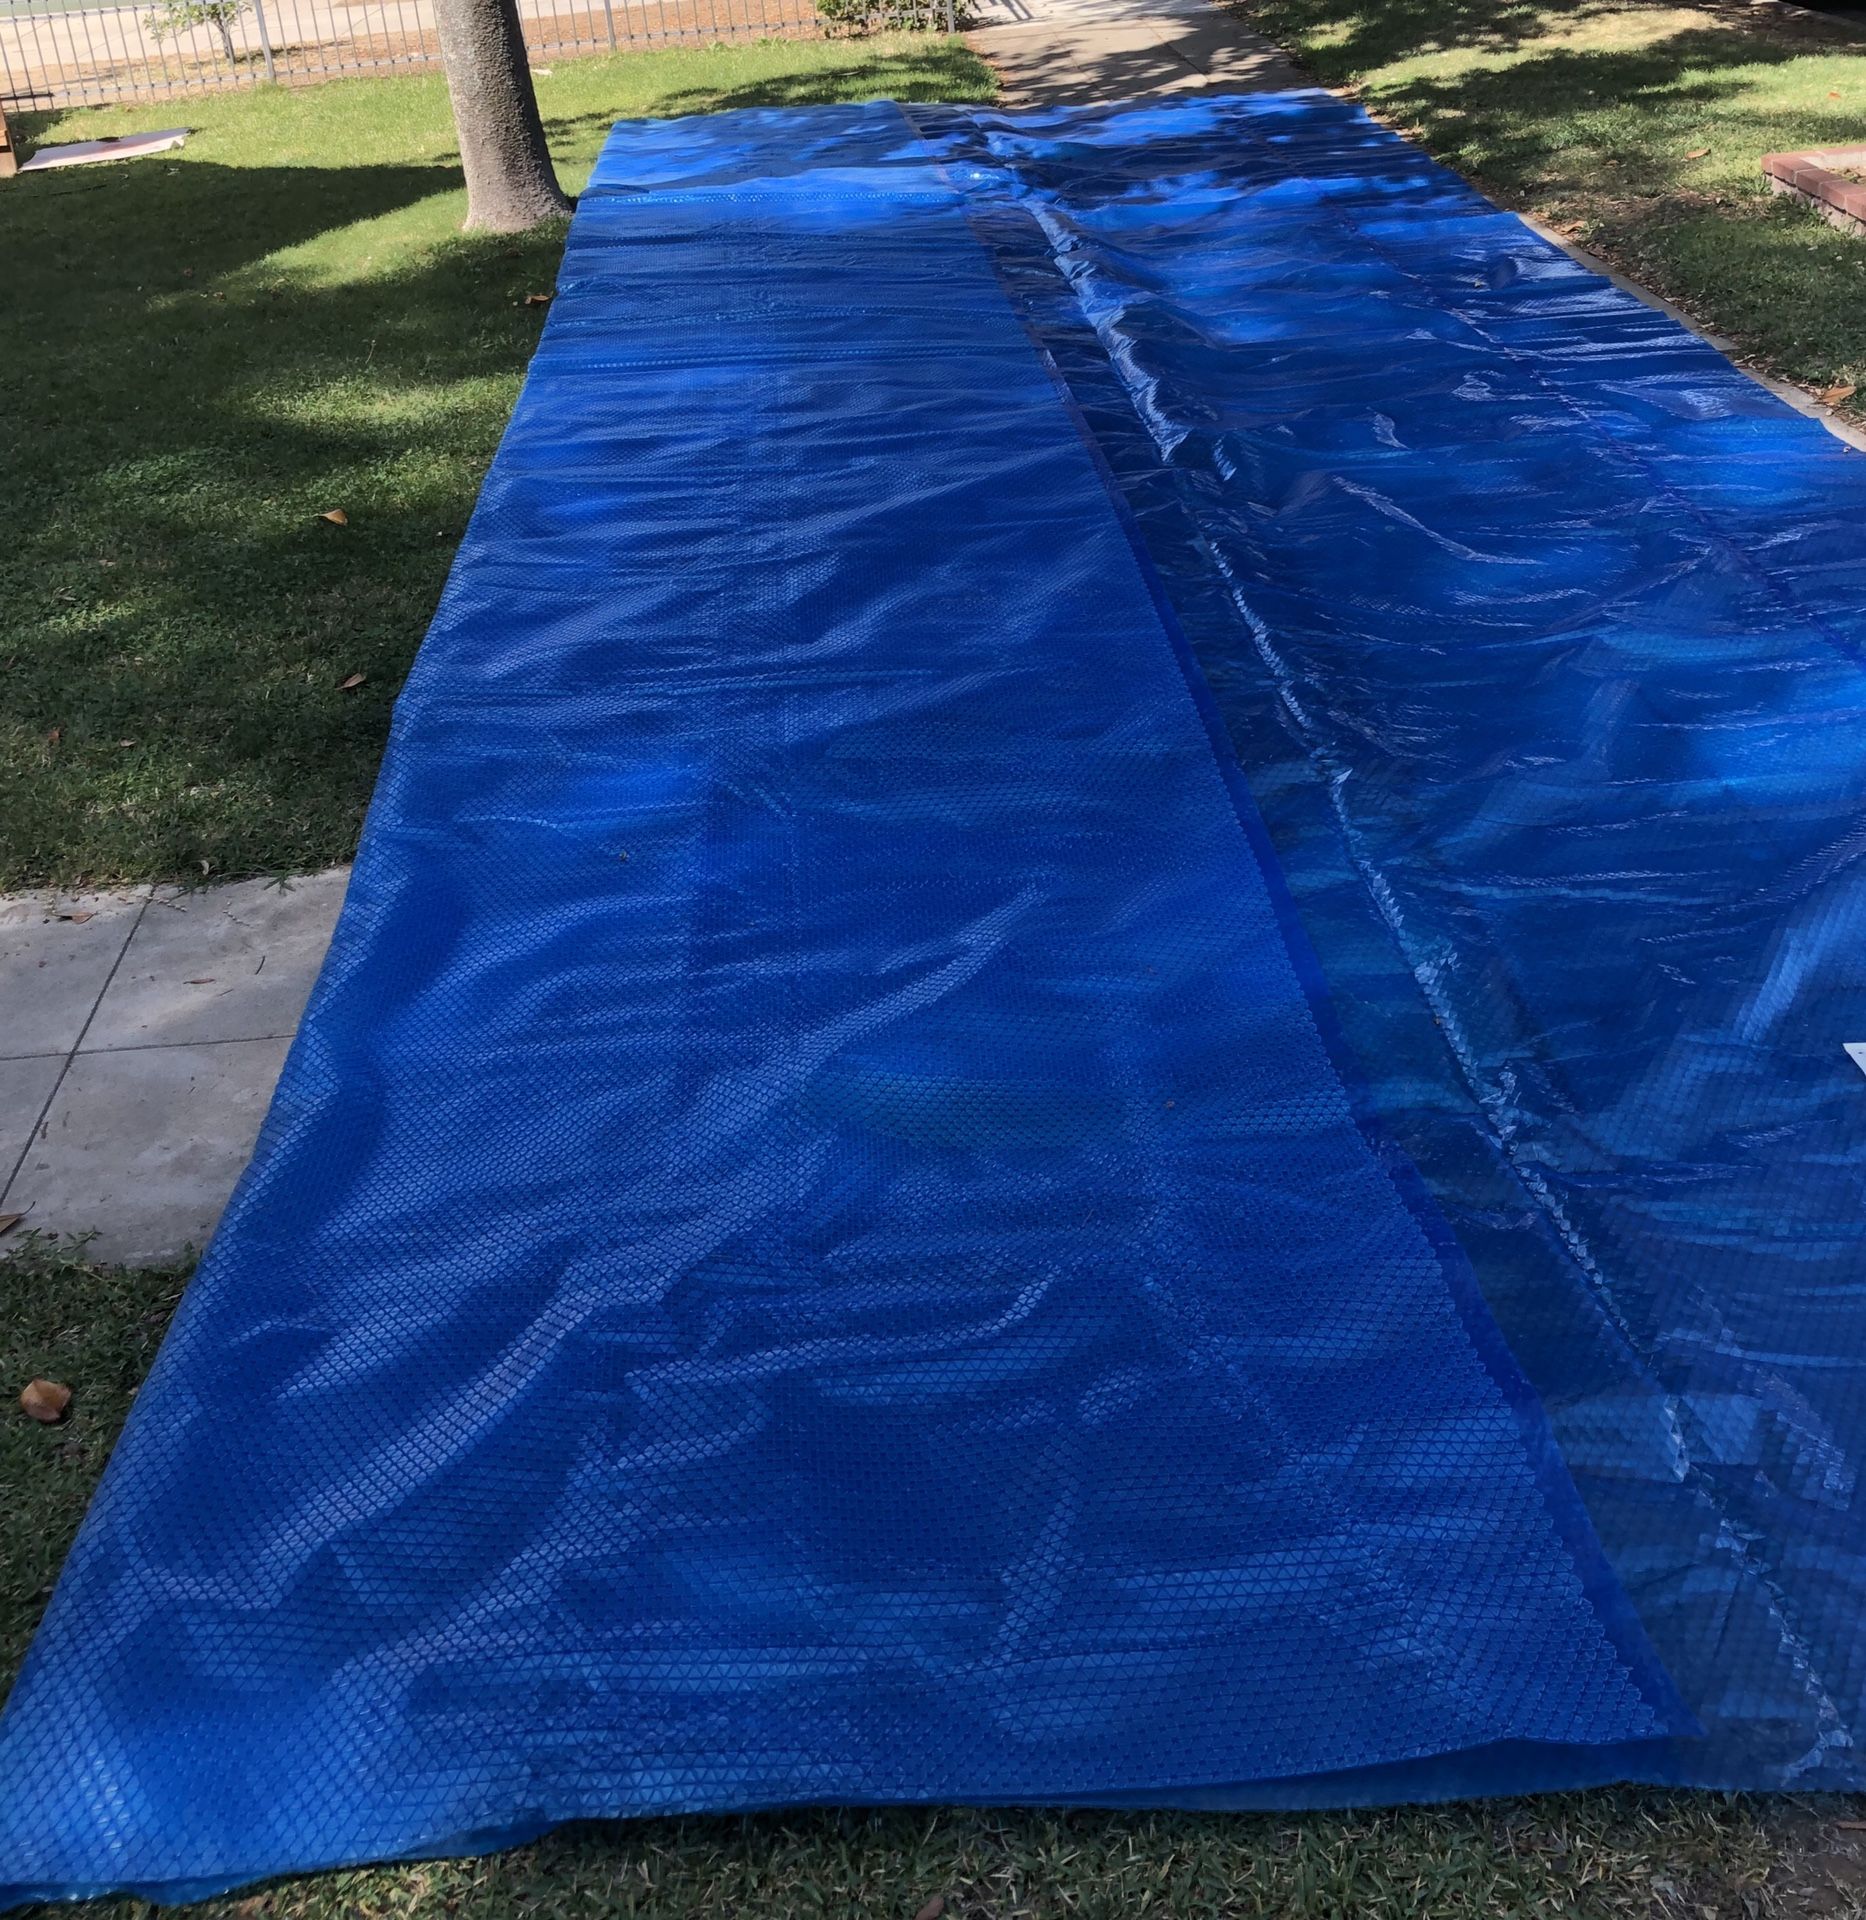 Thermal Pool cover. 18 x 36 feet. Brand new